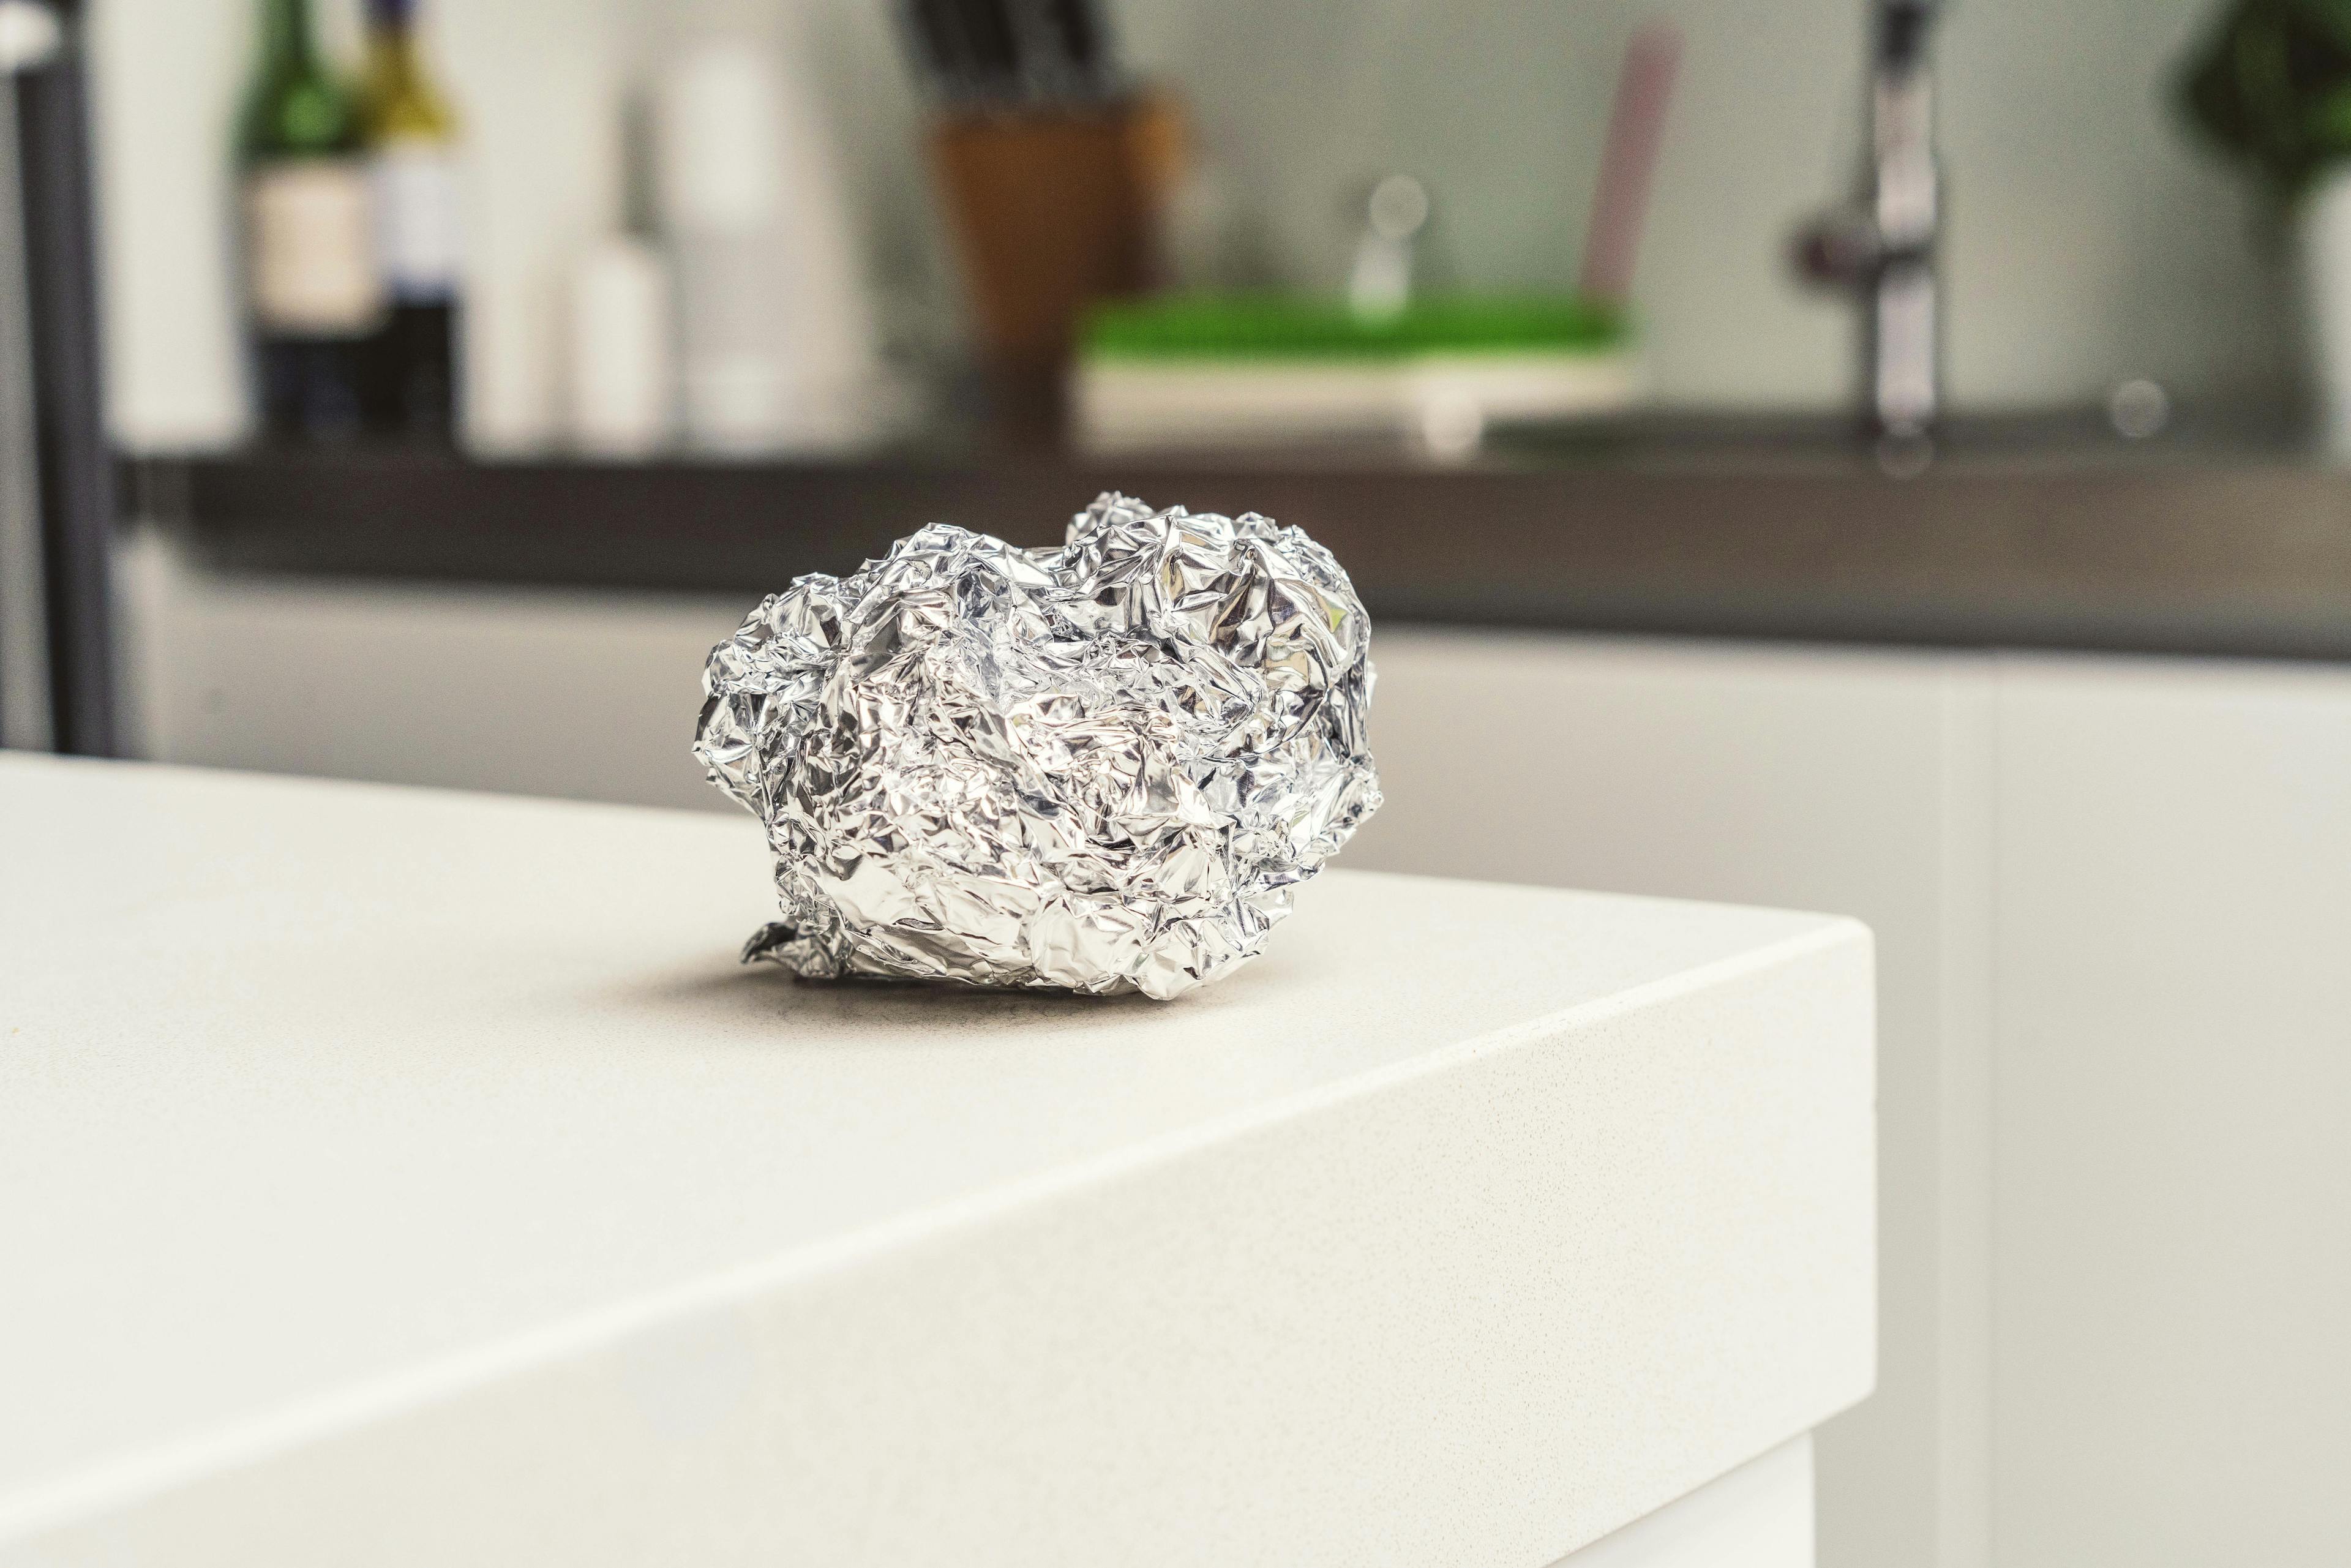 Scrunched-up ball of foil on a white kitchen counter